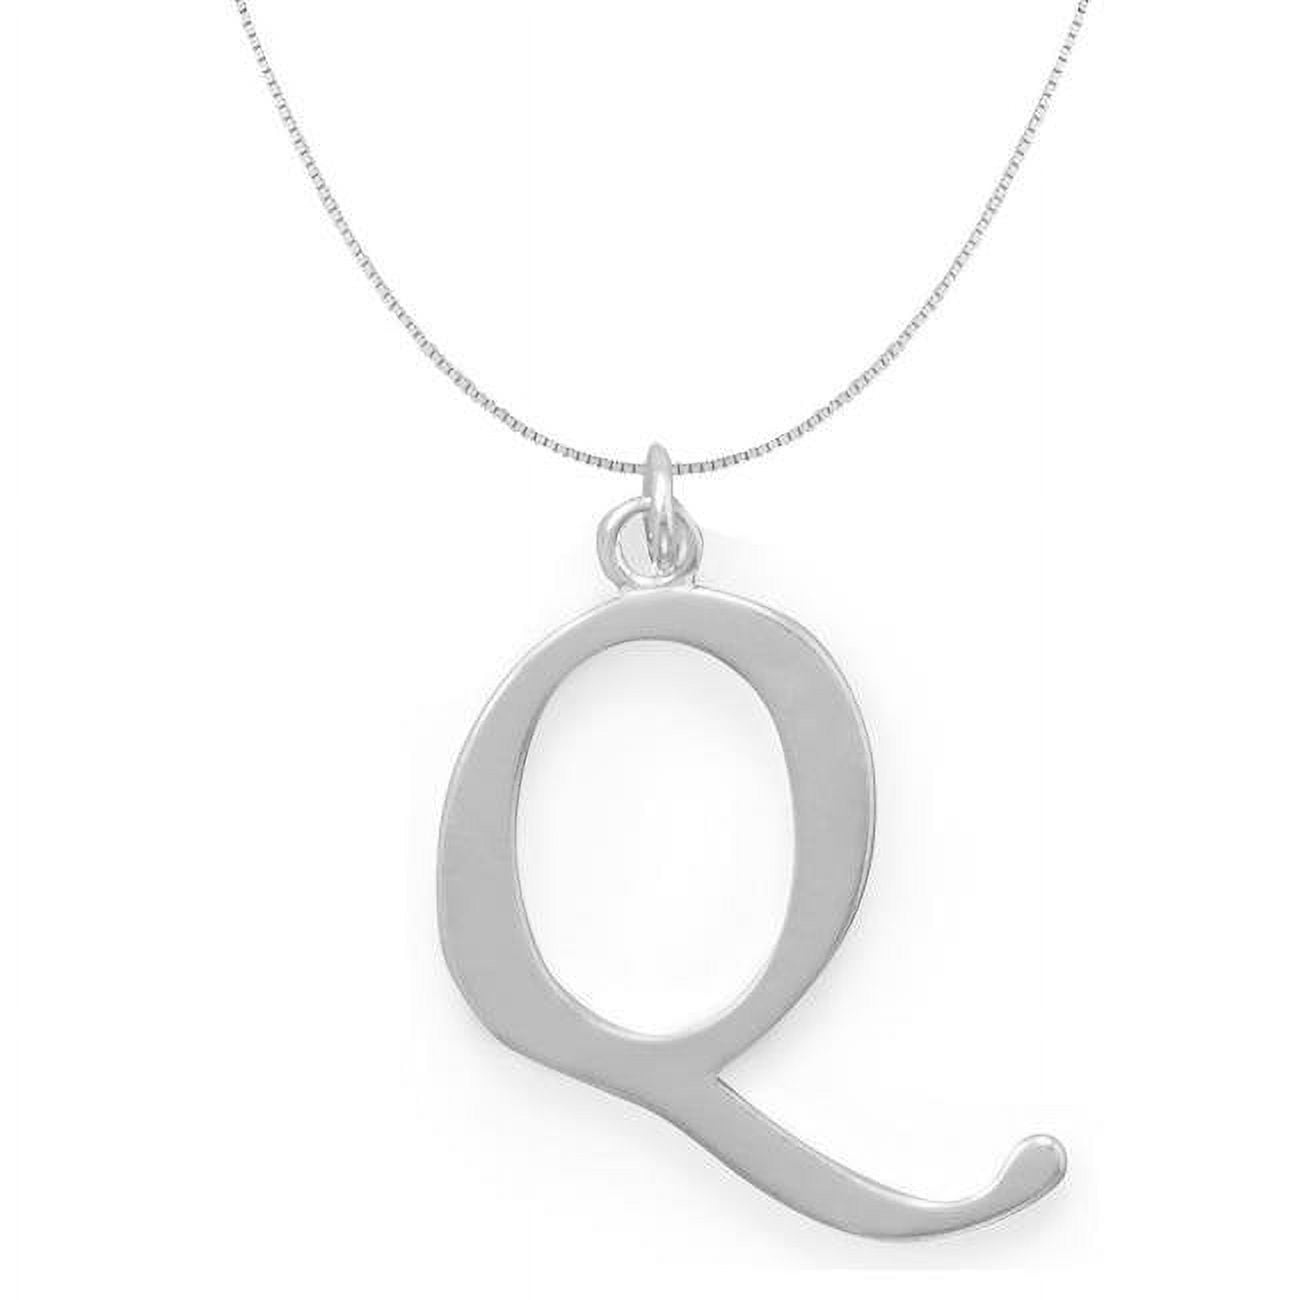 74661q-bx20 20 In. Sterling Silver Initial Letter Q Pendant With 0.70 Mm Thin Box Chain